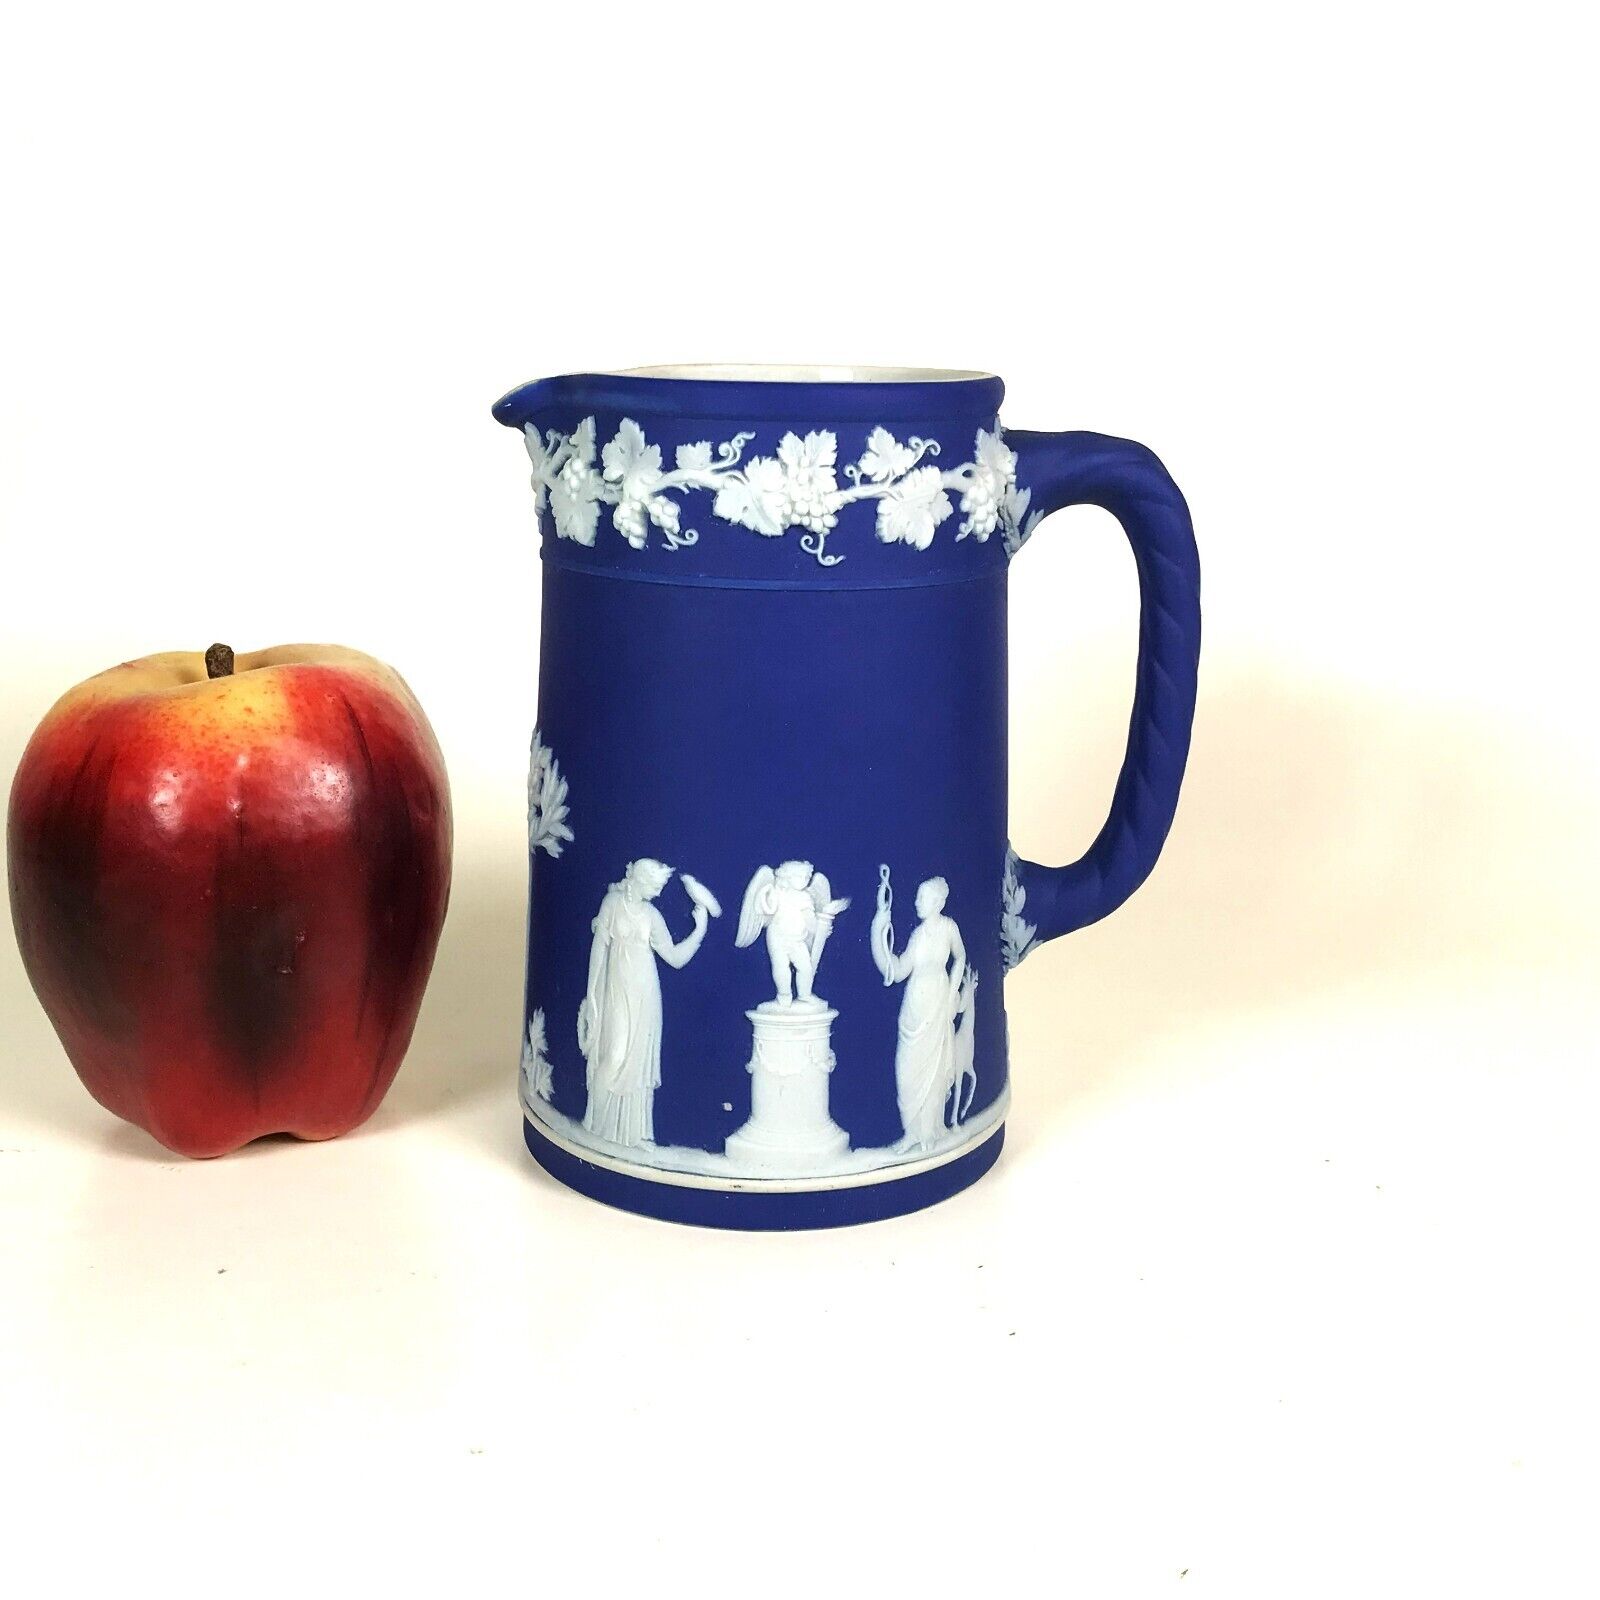 Early 1900s Wedgwood Cobalt Blue Dipped Japer Pitcher